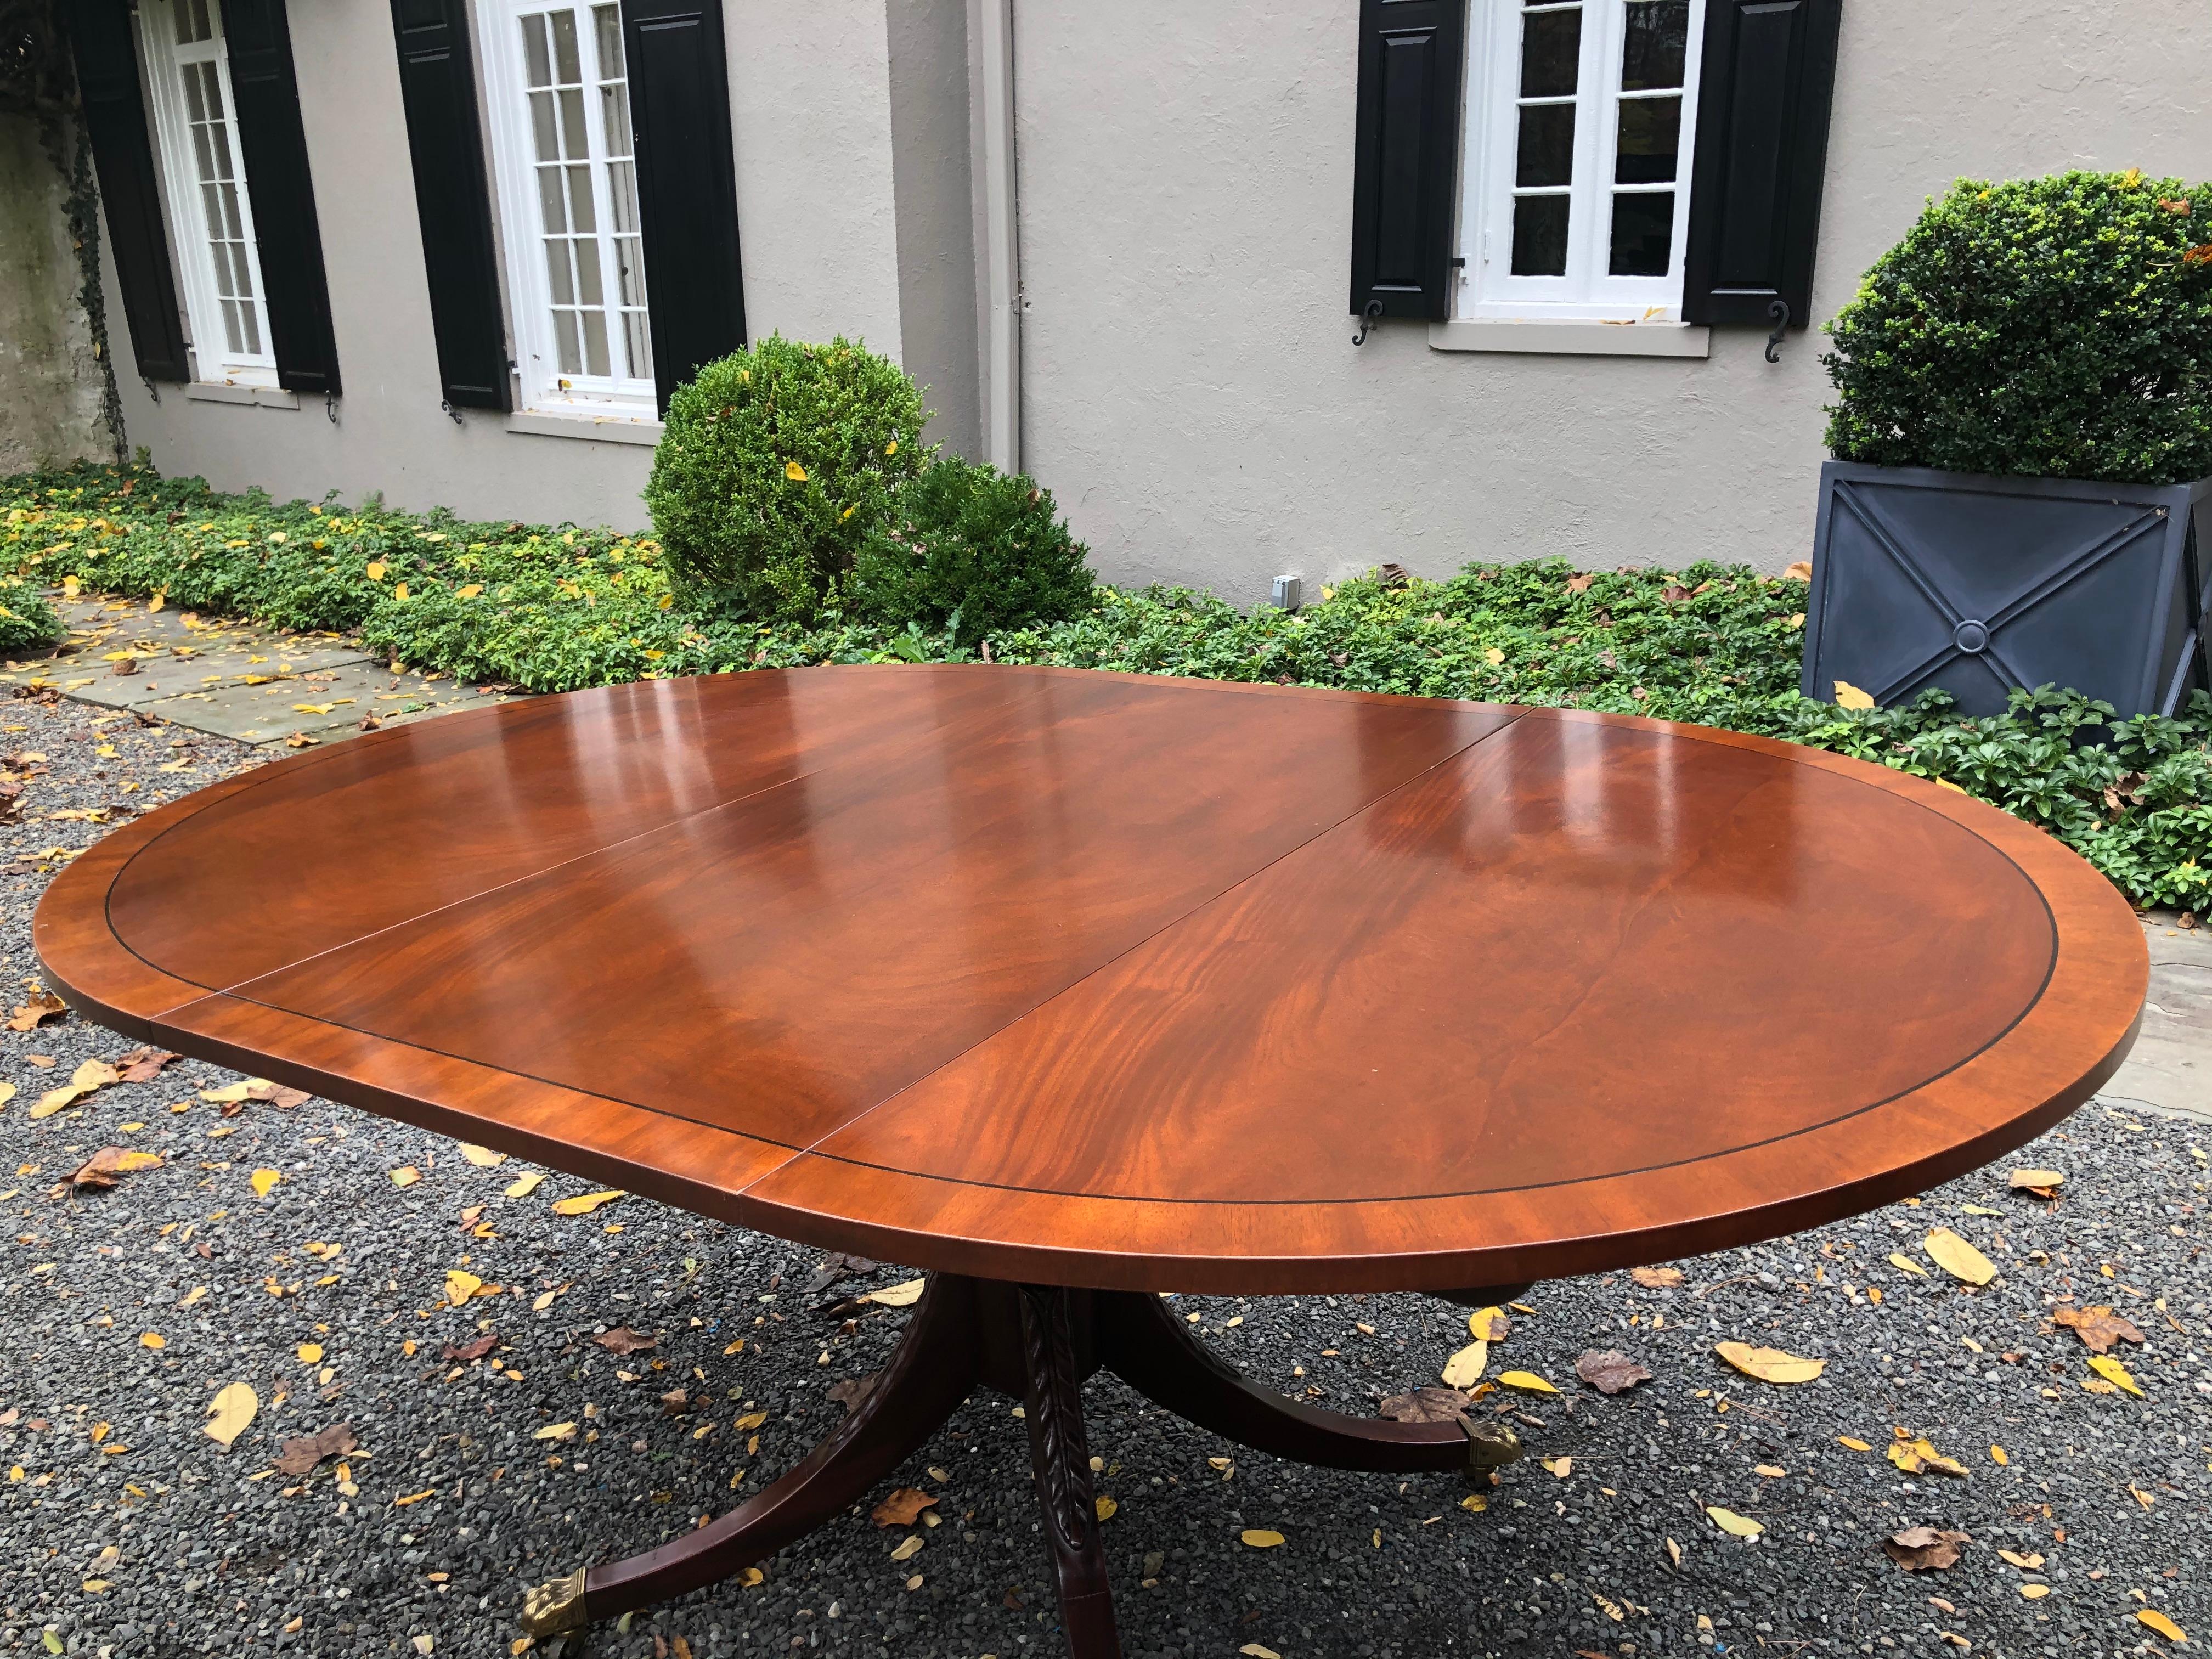 Vintage mahogany Sheraton style dining table by Baker. Part of the Historic Charleston Collection, this table has banding and string inlay around the perimeter. There is carving on the pedestal and legs and brass casters in the lion’s paw feet. The